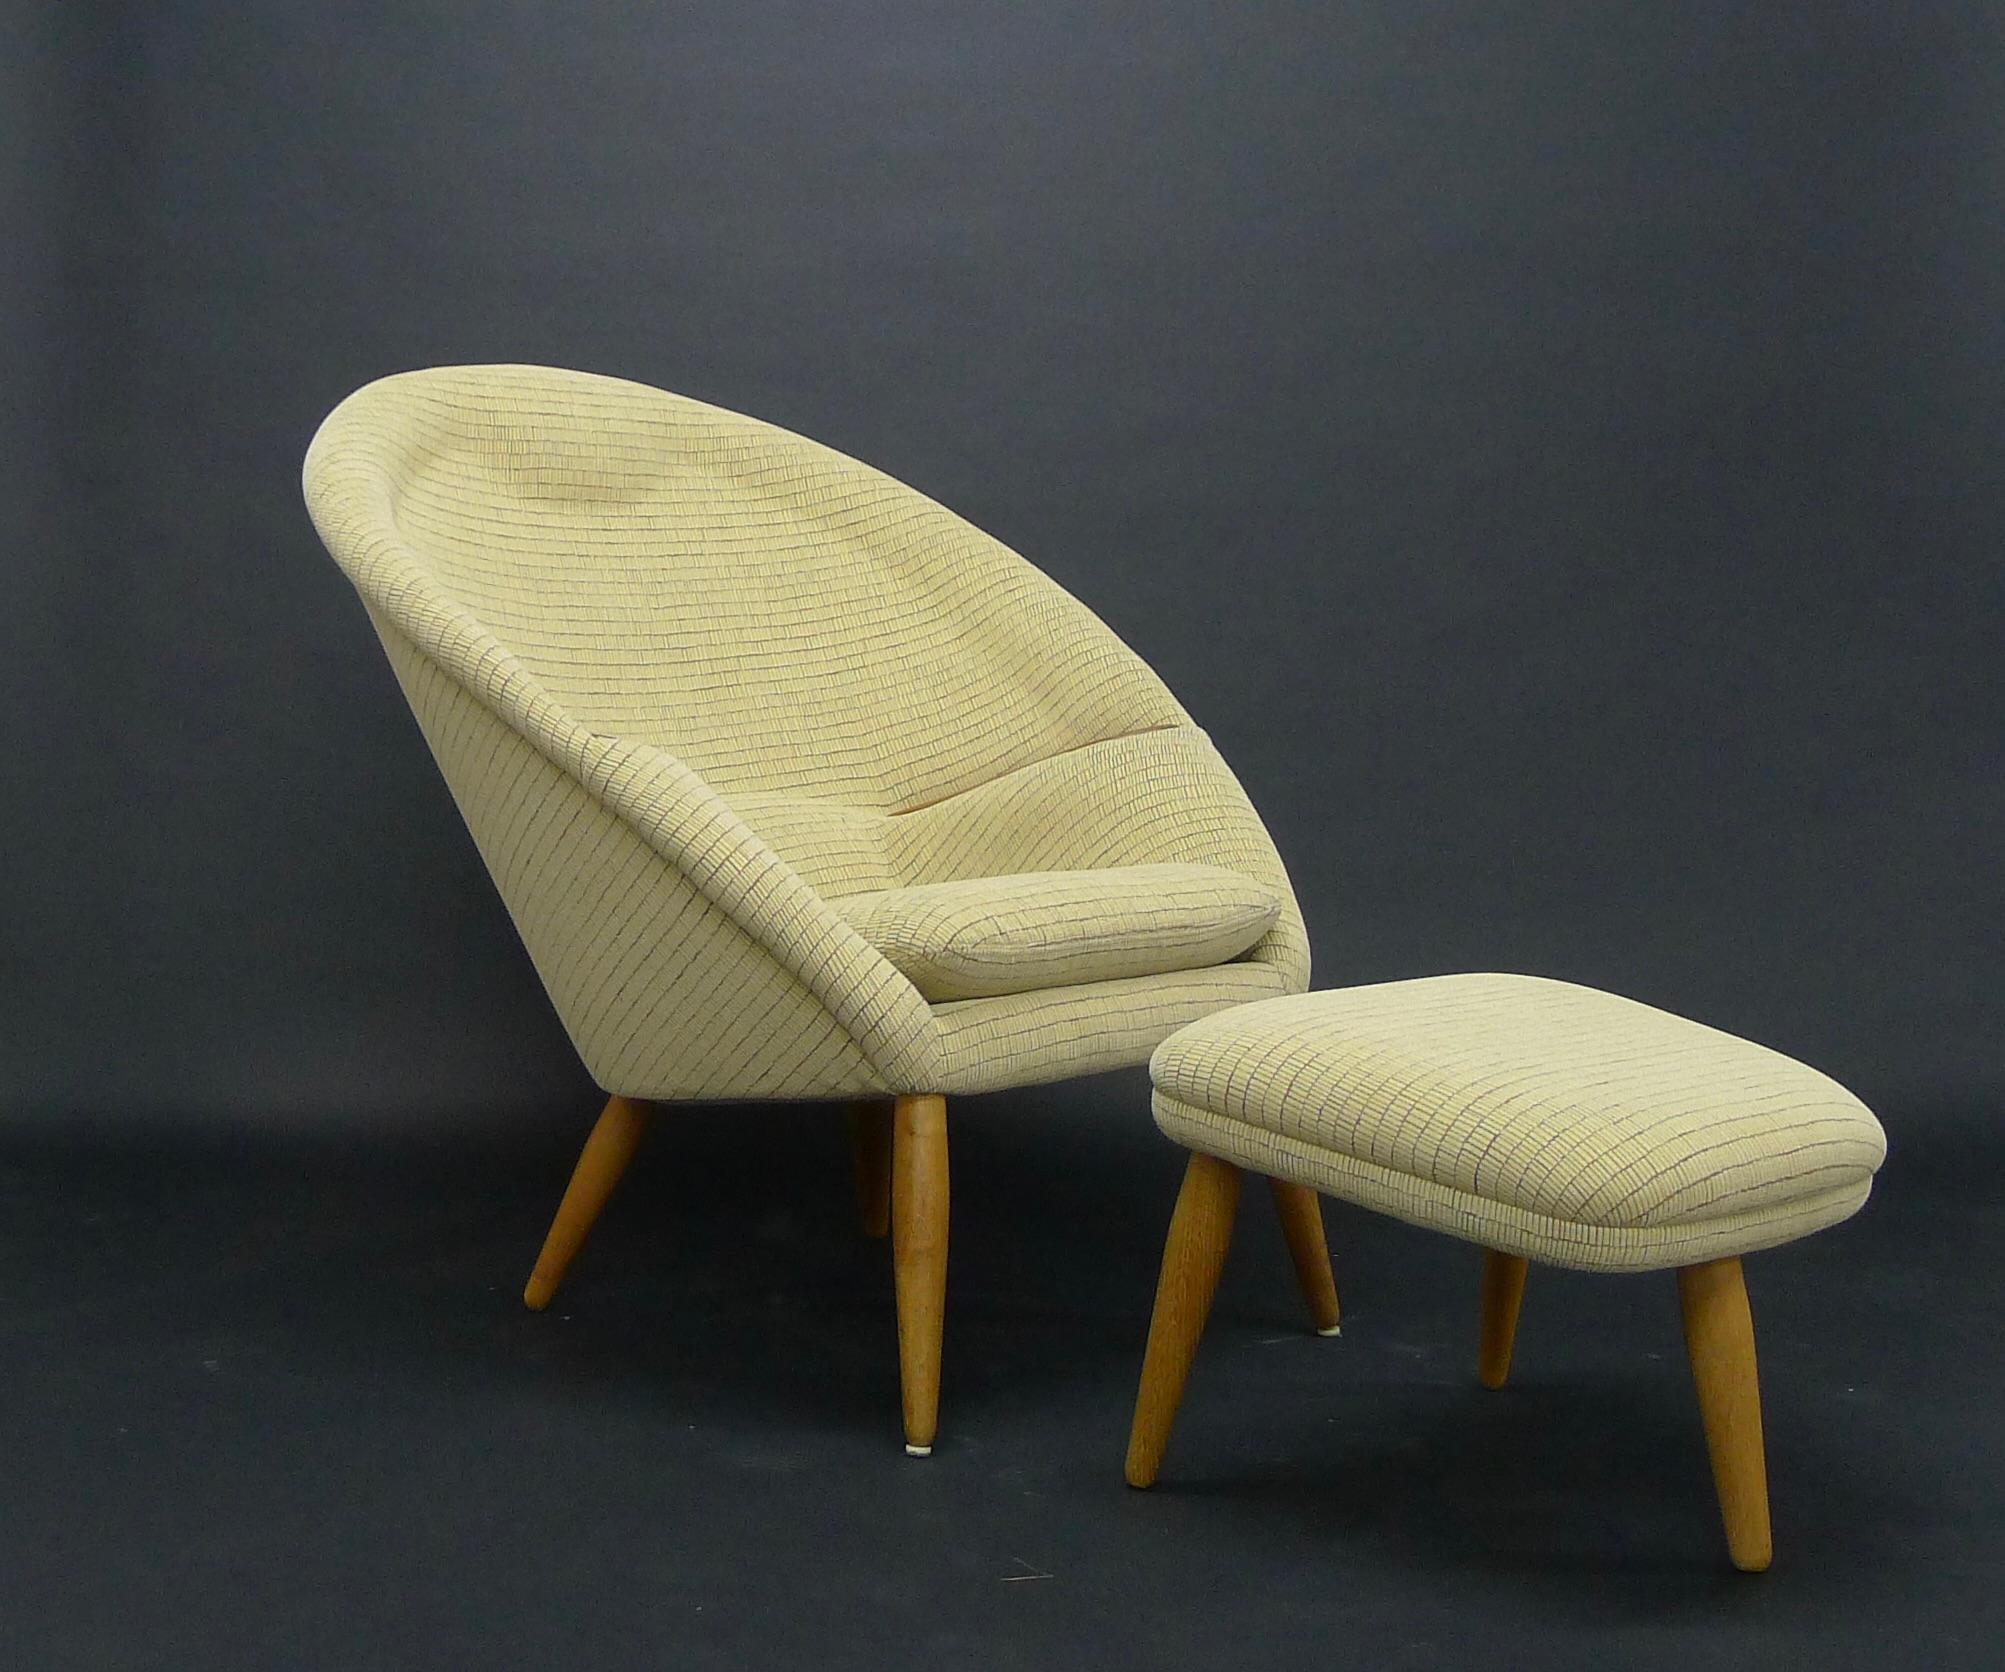 Oda chair and matching ottoman, designed in 1957 by Arnold Madsen, with oak legs and armrests, sympathetically reupholstered in soft ochre textured fabric.

This iconic chair has a horseshoe shaped construction with integrated headrest and inset